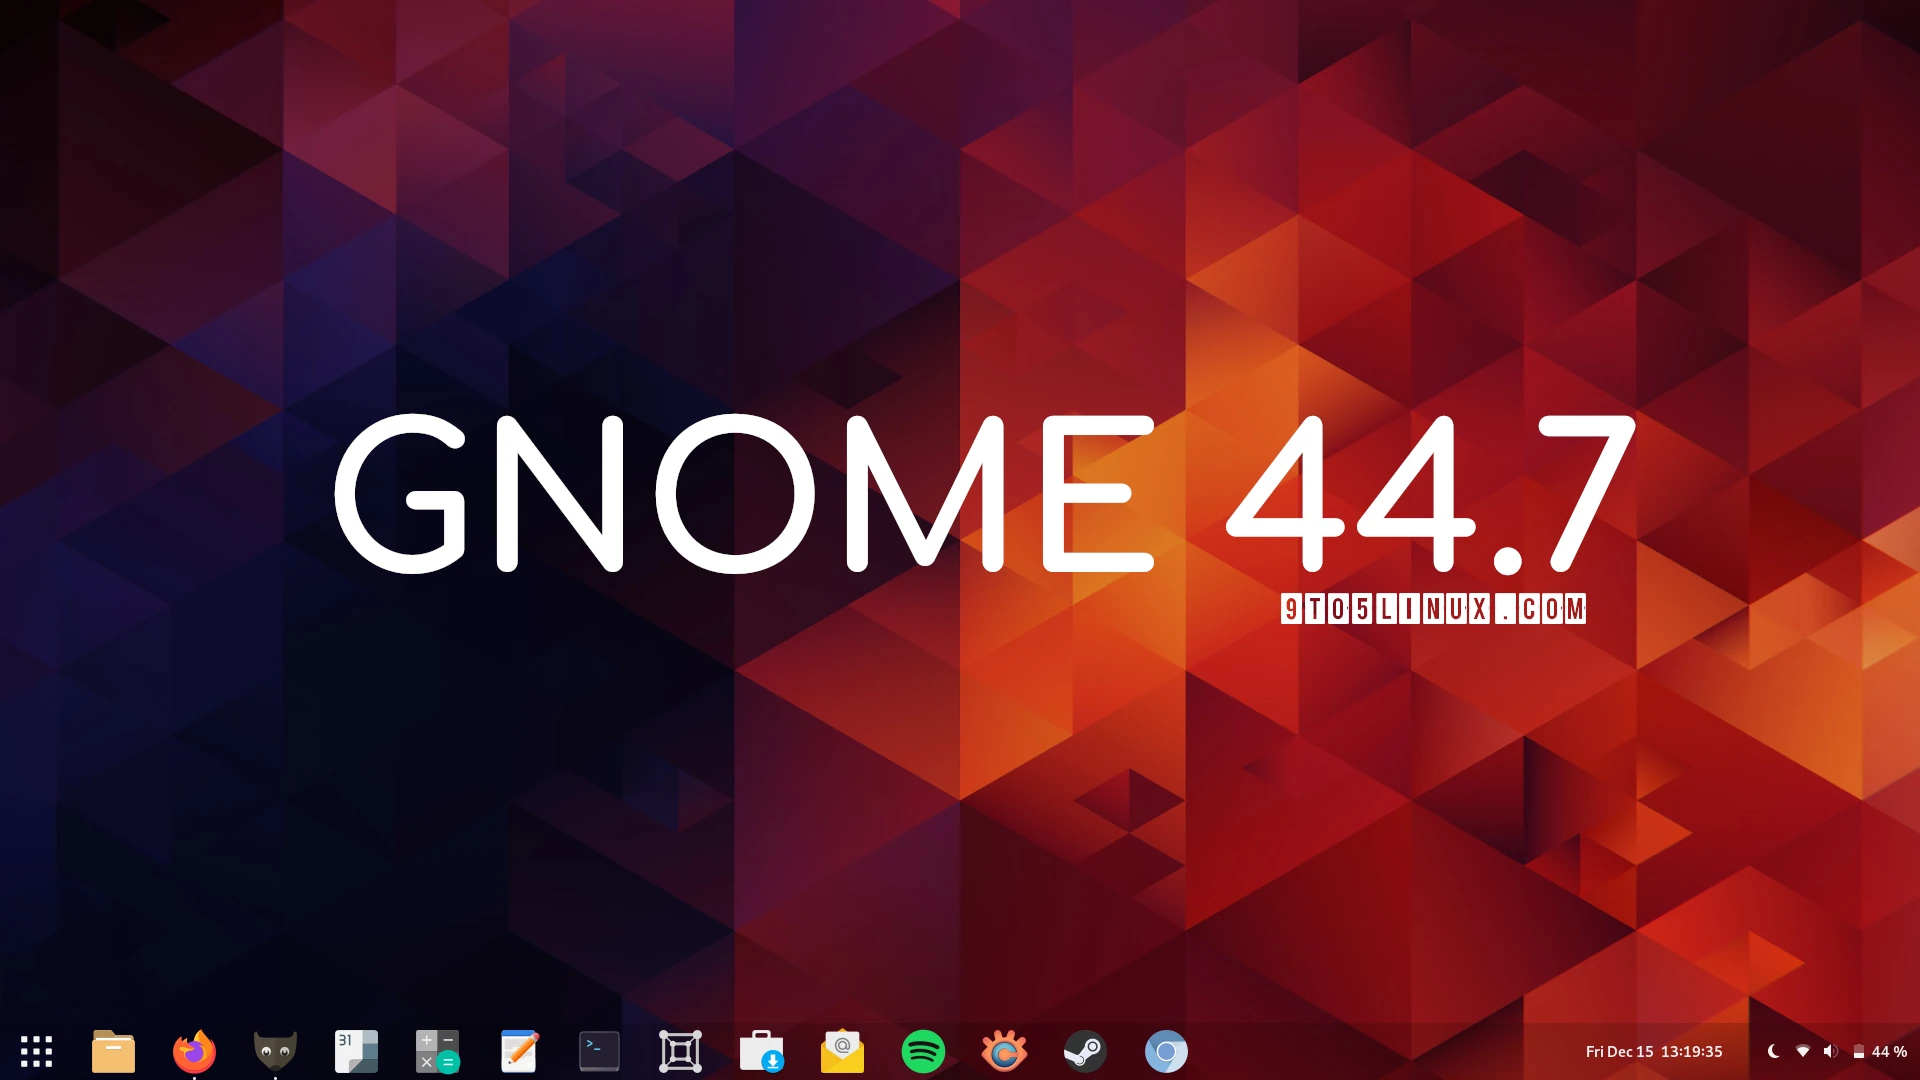 GNOME 44.7 Optimizes Shell Application Search and Improves Performance